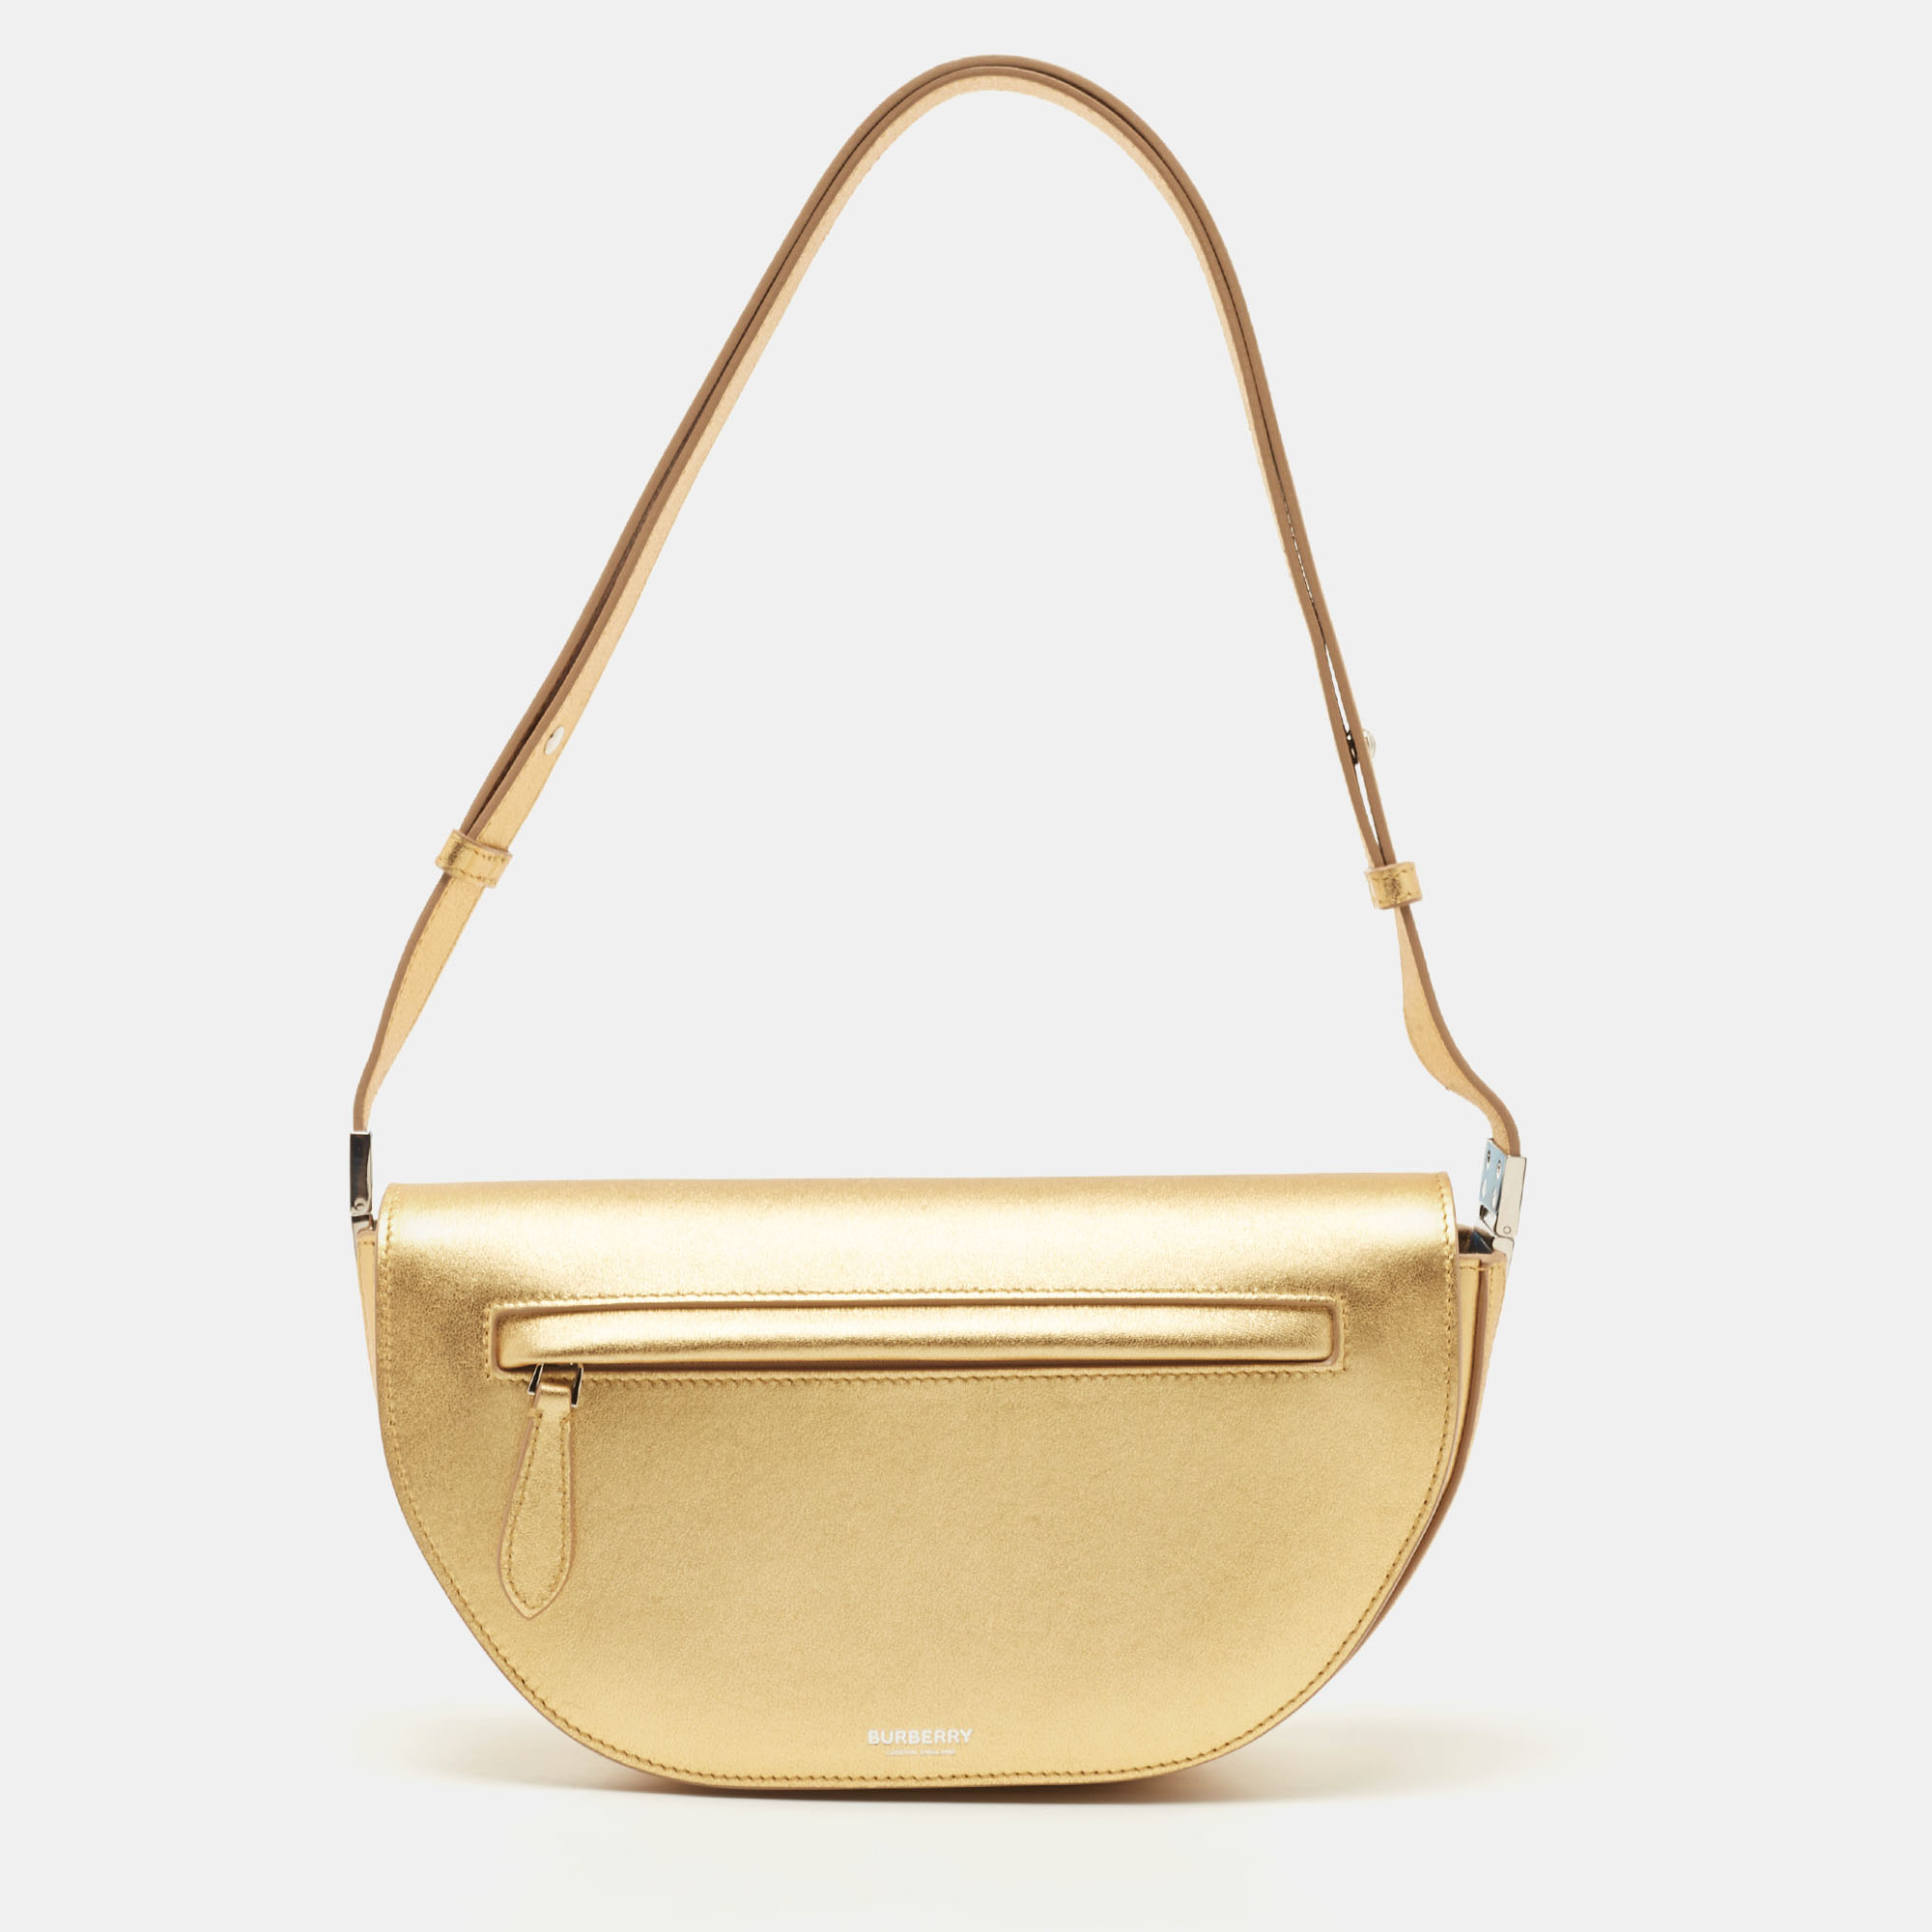 Burberry Gold Leather Small Olympia Shoulder Bag